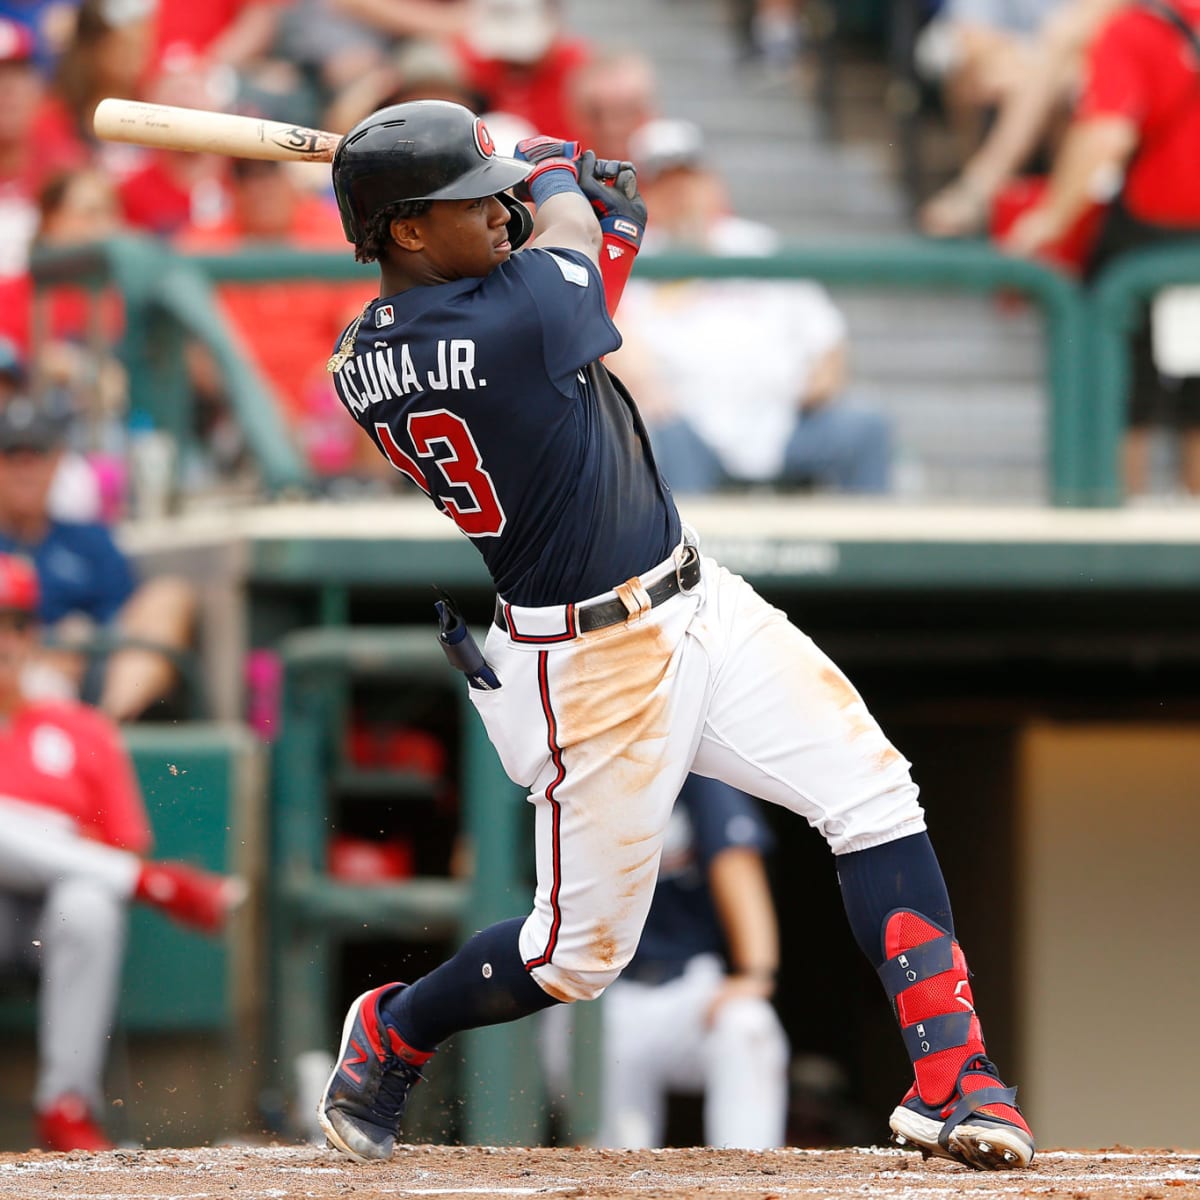 Ronald Acuna Jr. #13 of the Atlanta Braves hits a home run in the